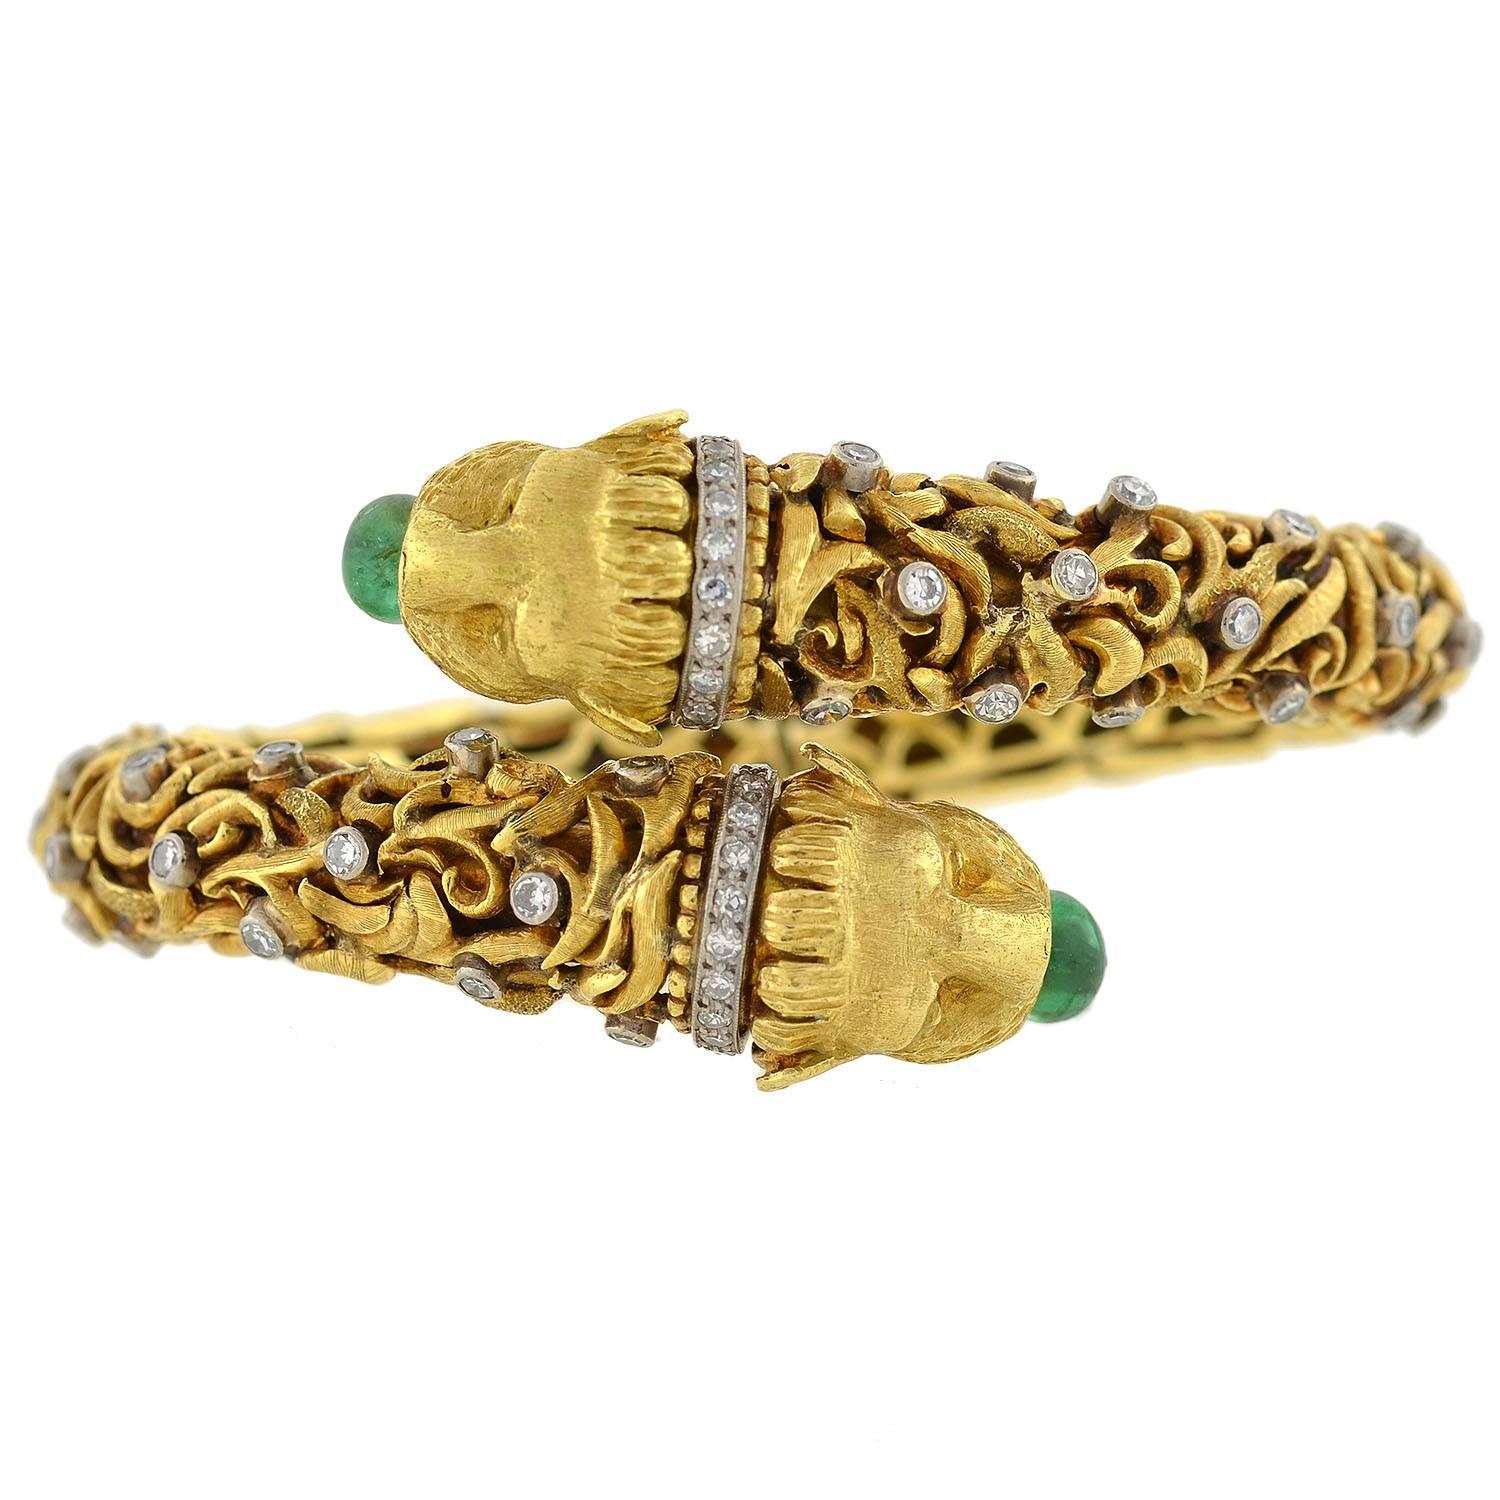 An absolutely fabulous signed Vintage Zolotas bracelet from the 1960's! This gorgeous hinged bangle is made of 18kt yellow and white gold and has a unique vine-like design that wraps around the entire bracelet. Etching can be found interspersed